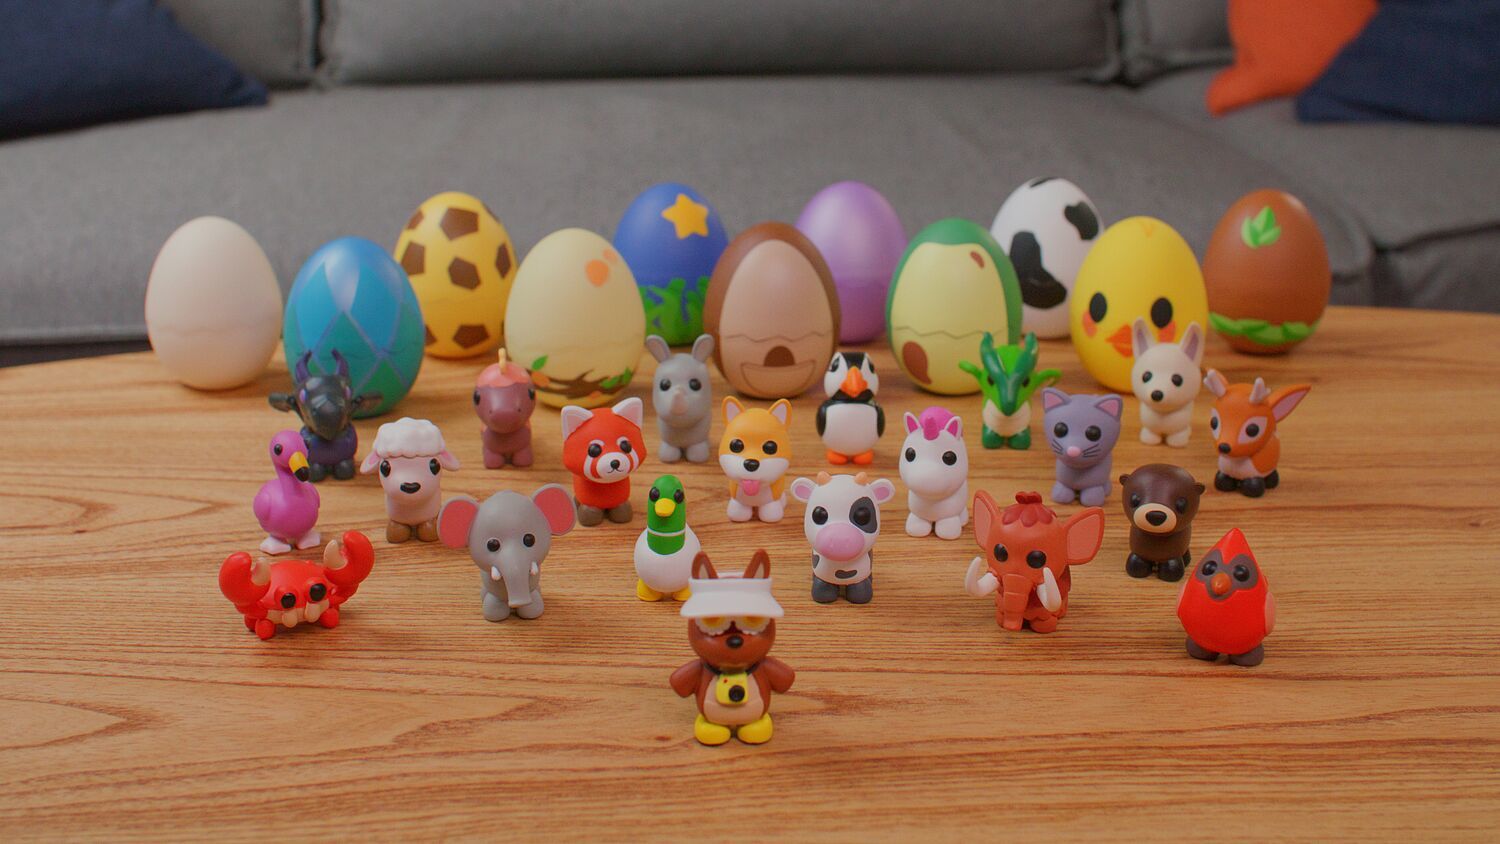 Adopt Me! Mystery Pets Series 2 Blind Egg Figure